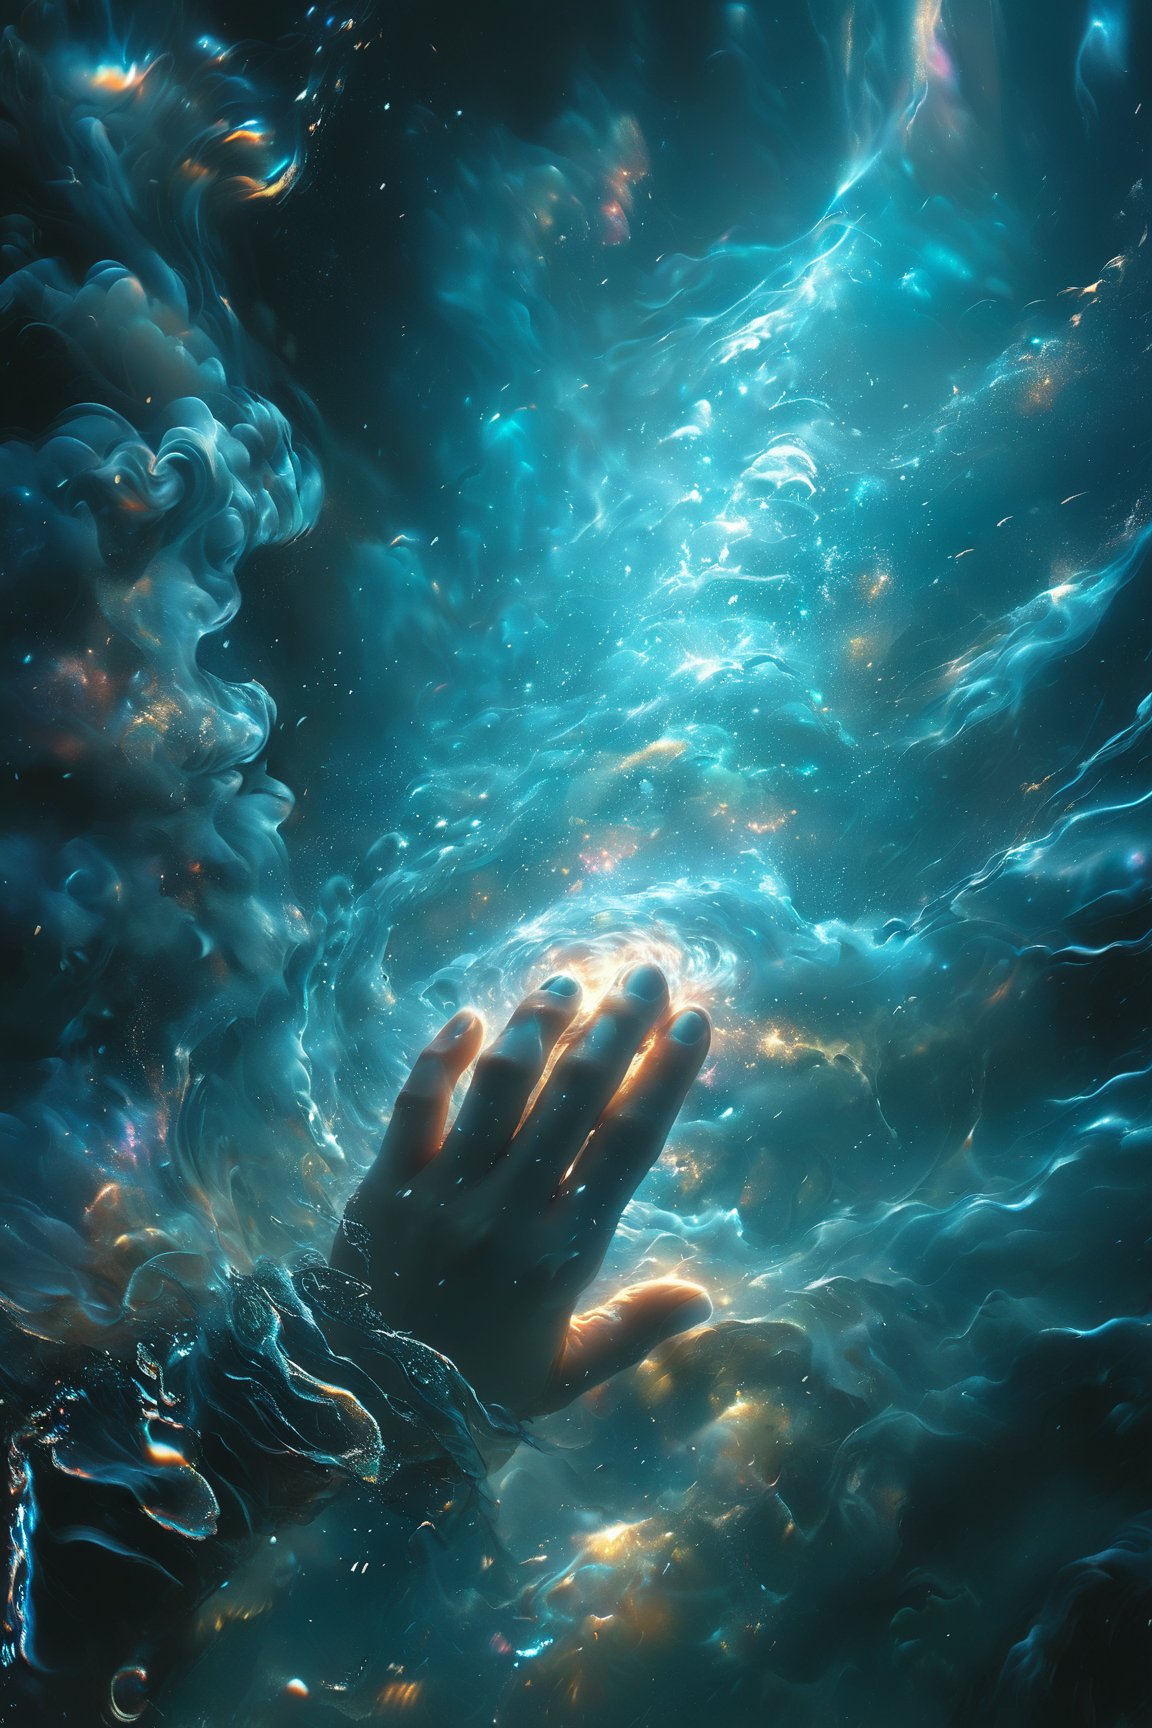 a breathtaking underwater photo of a hand underwater touching the surface to create a ripple of bright abstract eye galaxy nebula vortex of beauty and nature, sunlight and chaos<lora:EMS-364634-EMS:0.800000>, <lora:EMS-83584-EMS:1.200000>, <lora:EMS-22619-EMS:0.800000>, <lora:EMS-385891-EMS:1.000000>, <lora:EMS-66901-EMS:0.800000>